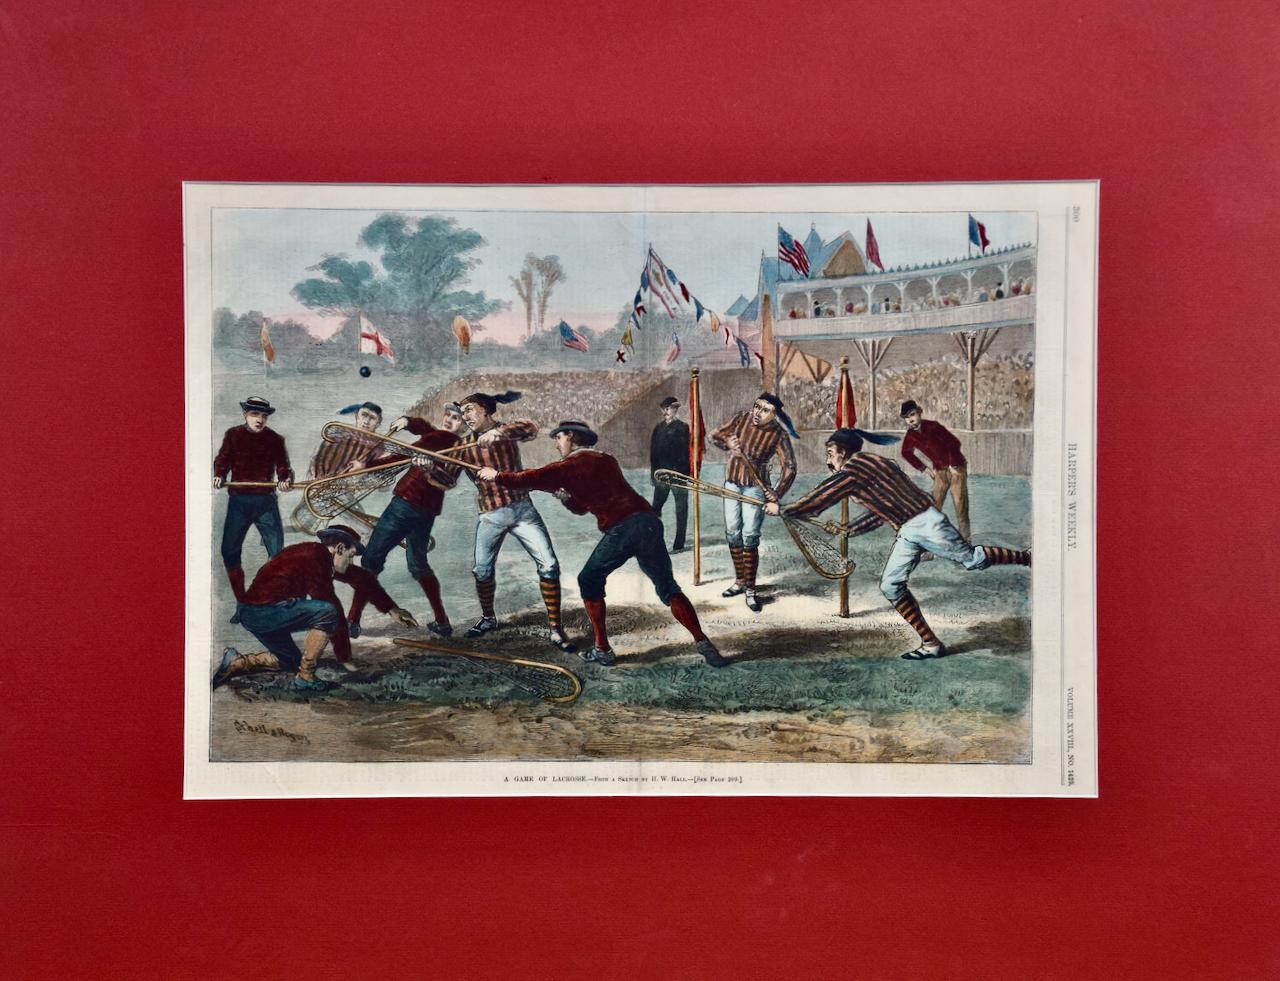 "A Game of Lacrosse": A Hand-colored 19th Century Woodcut Engraving by Hall 